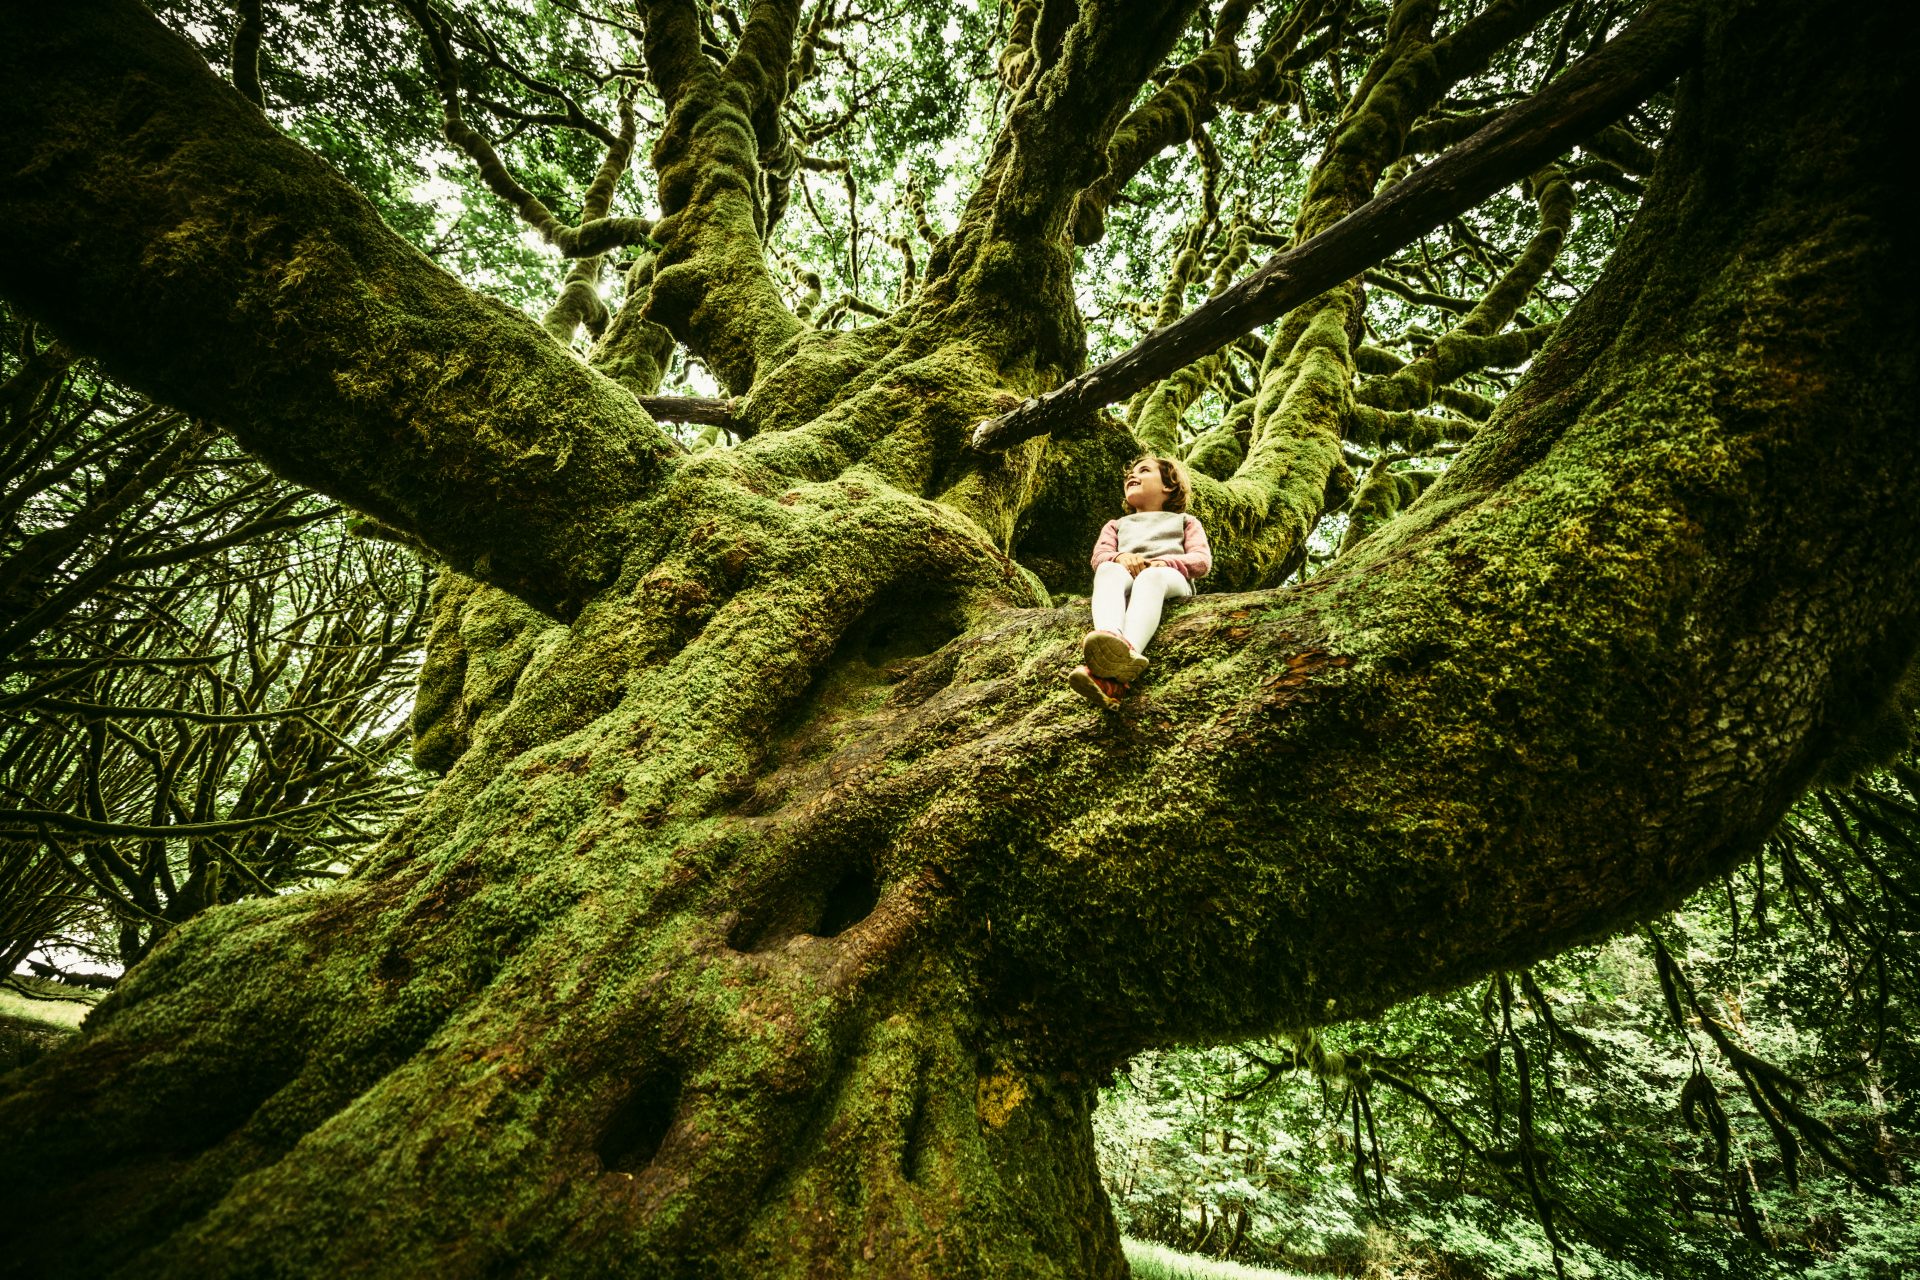 The 15 oldest trees in the world